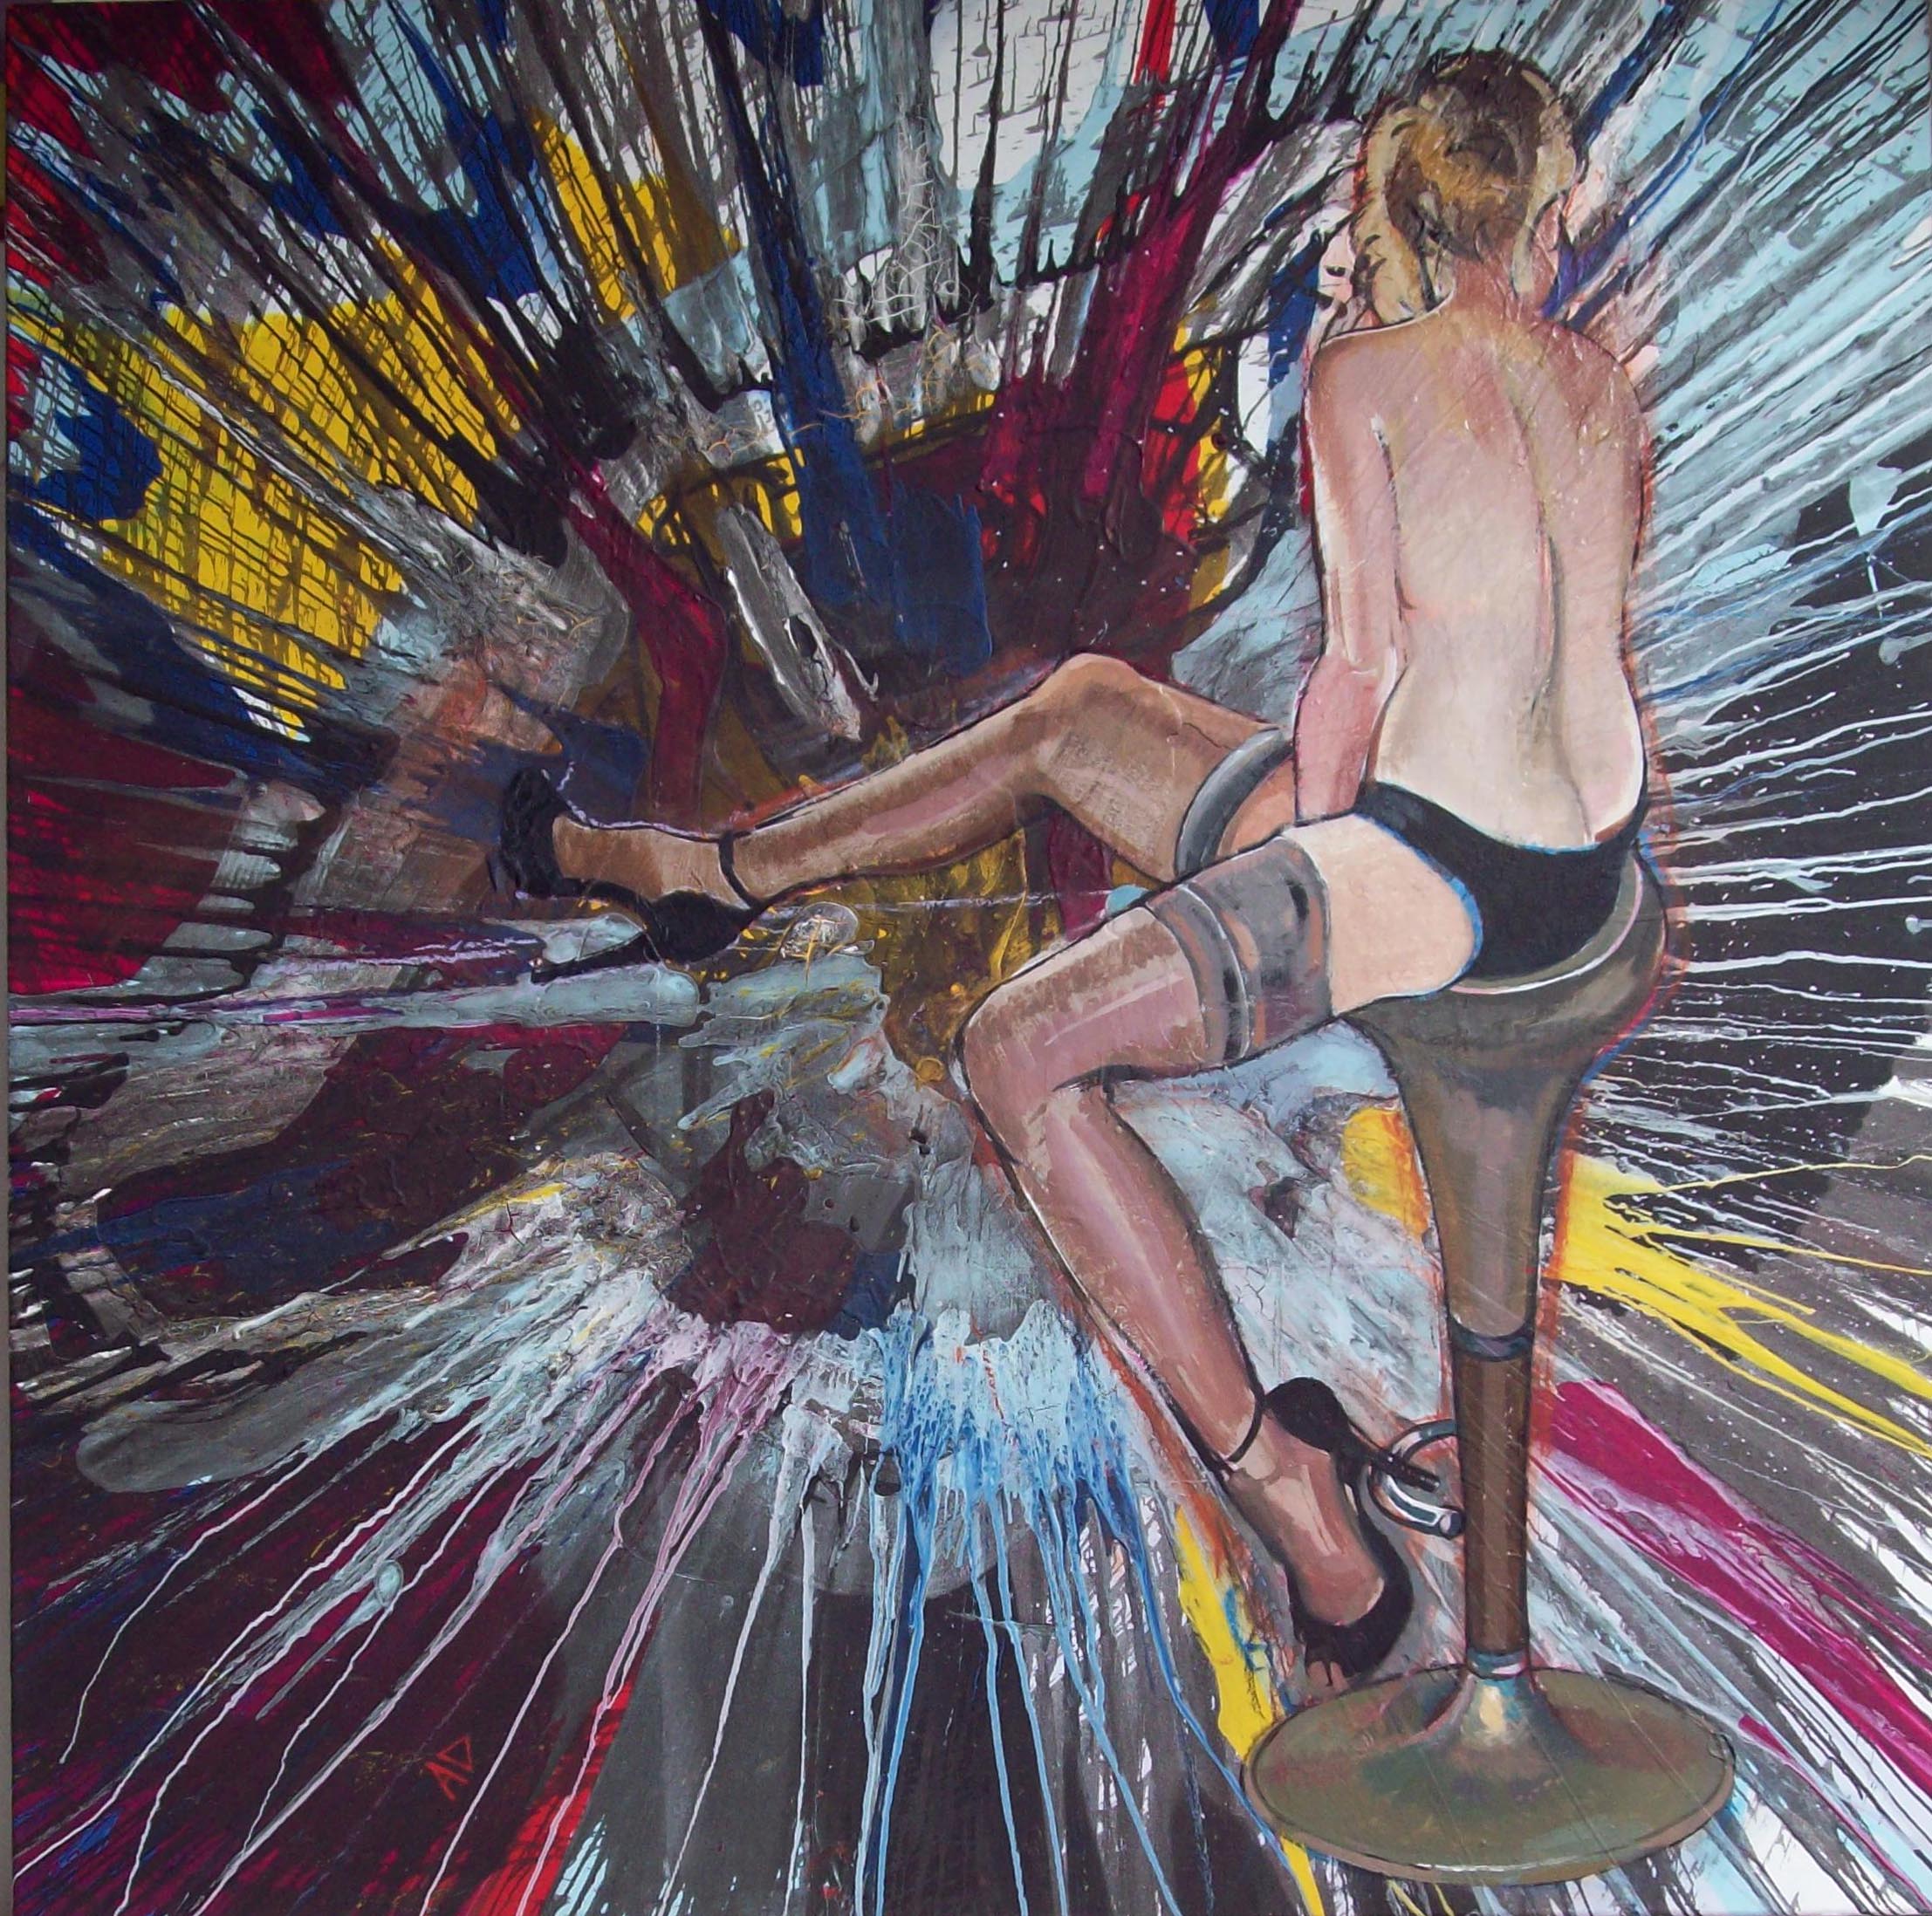 the Doll's House catalogue colour image of a dancer in a spin painting by alan dedman